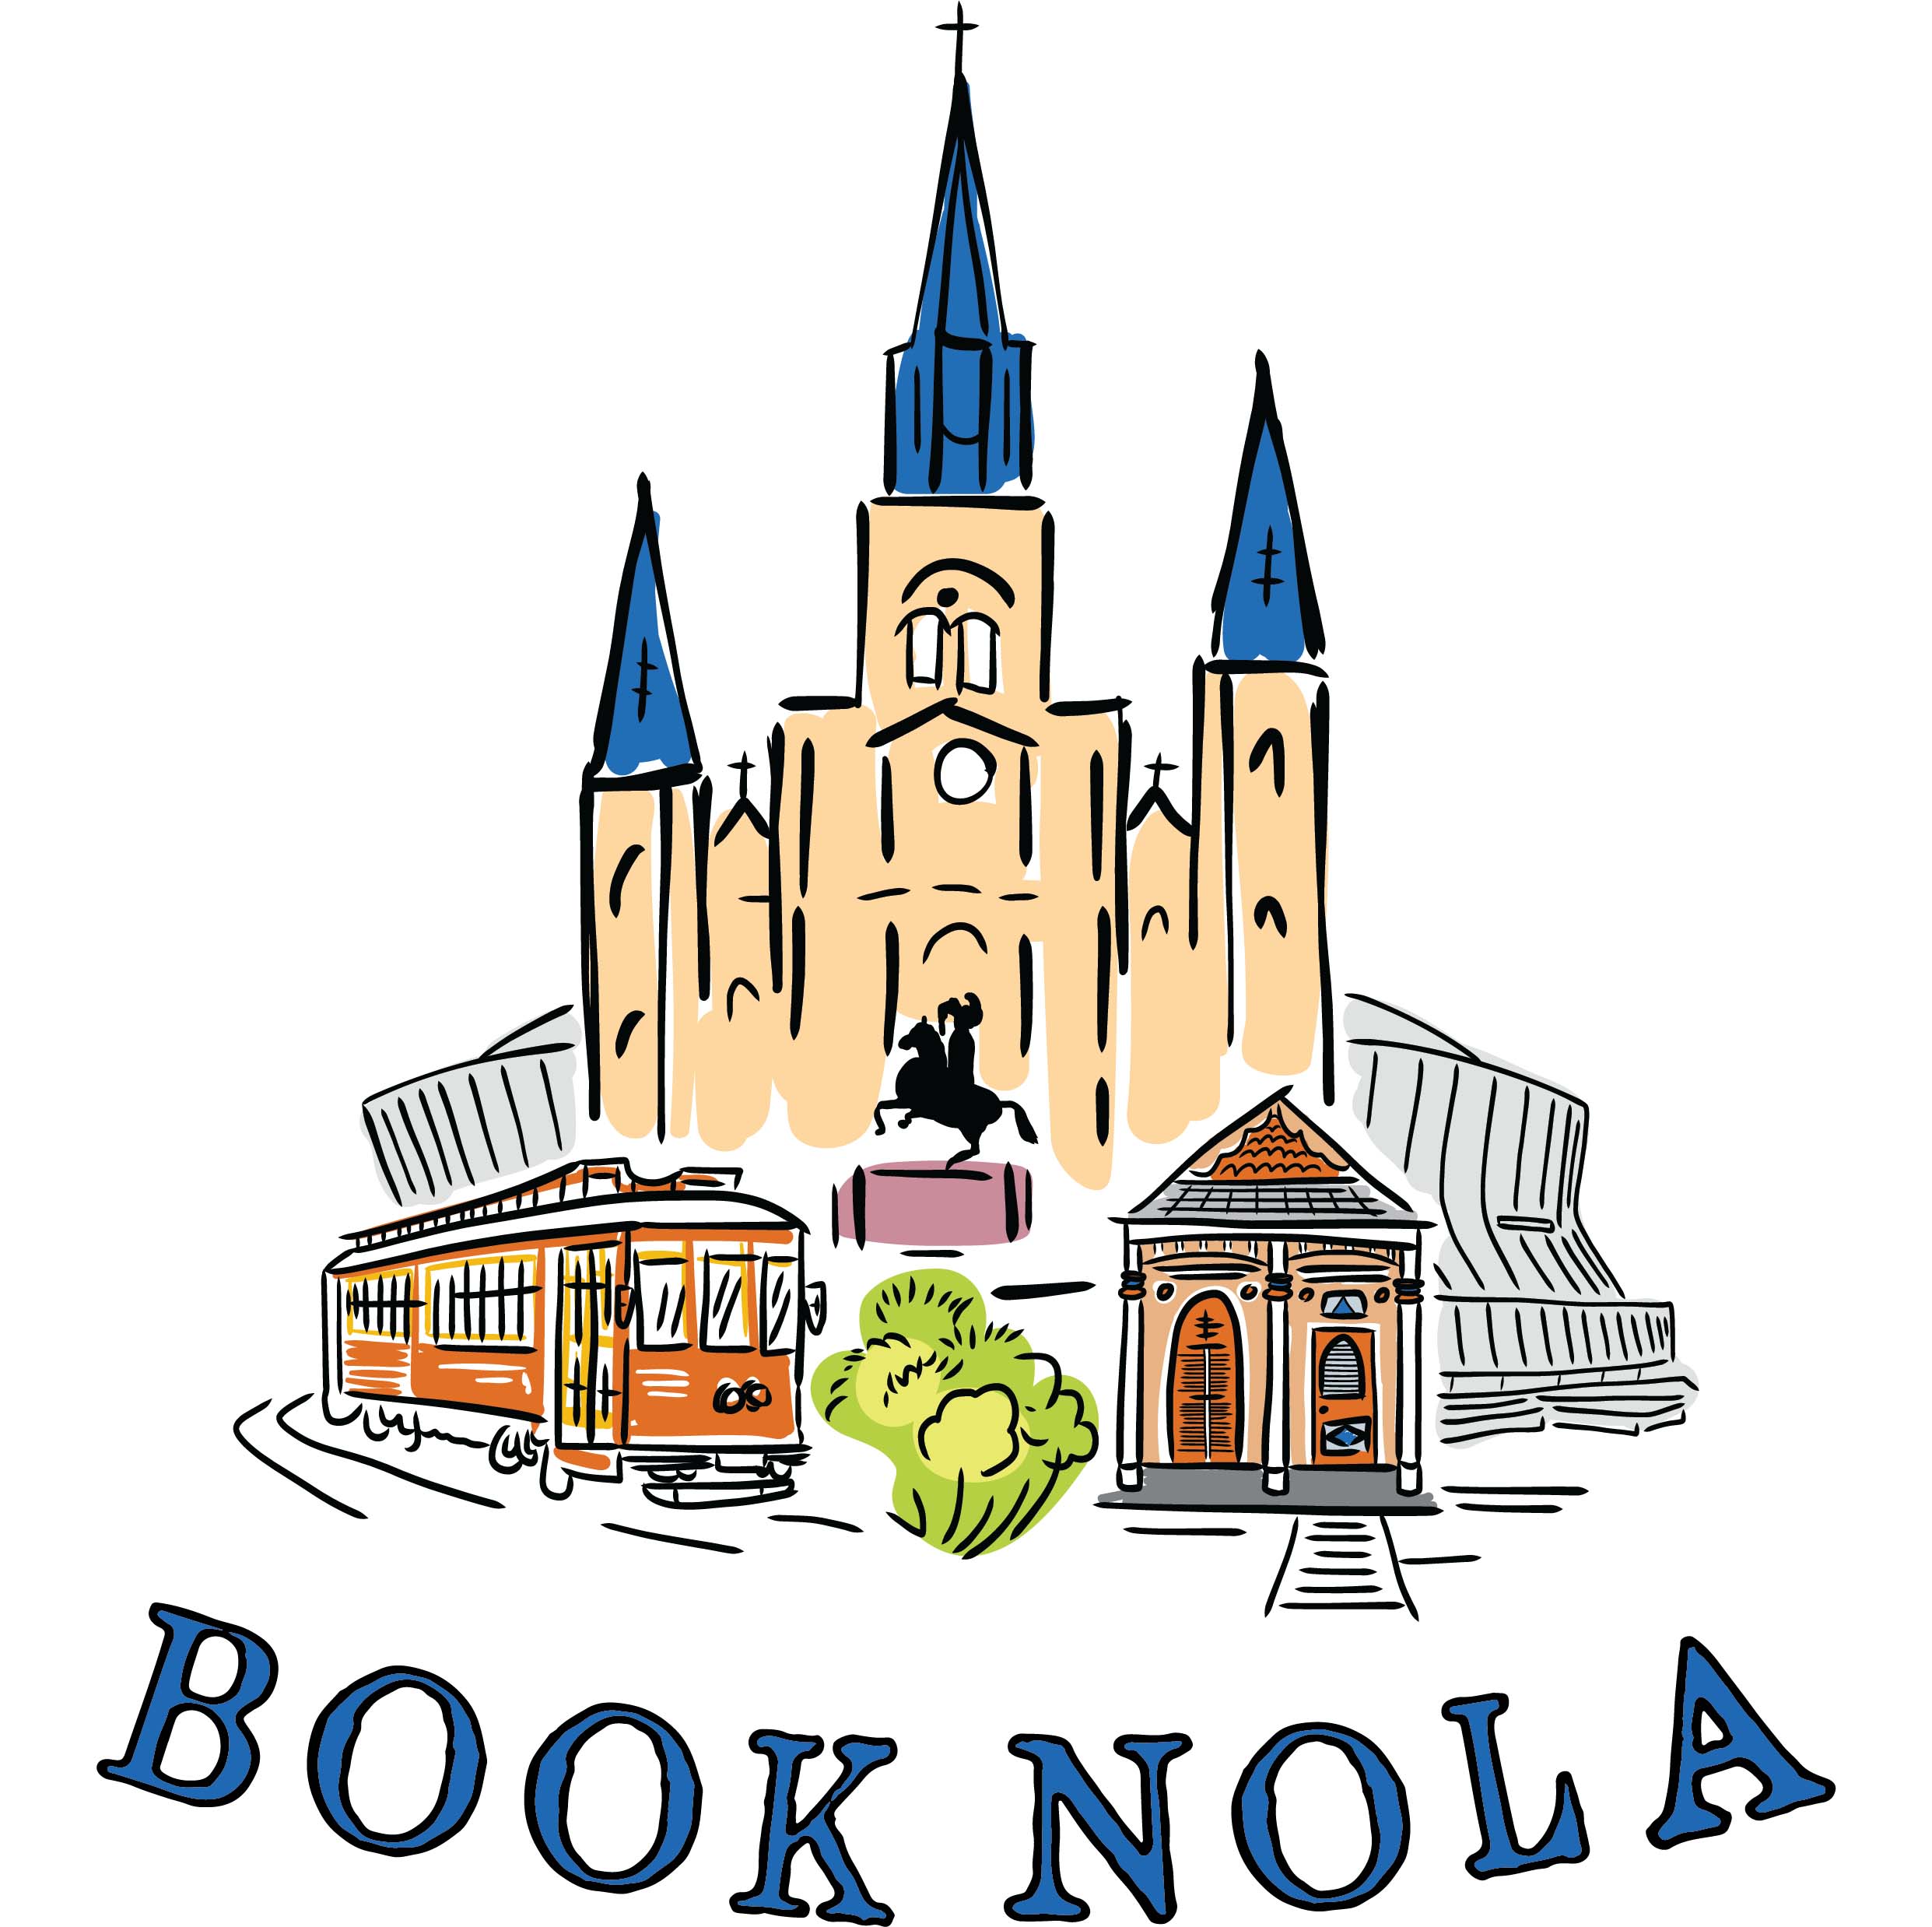 Book NOLA - Vacation Rentals and Property Management throughout the Greater New Orleans Area - Always Rest Easy in the Big Easy!